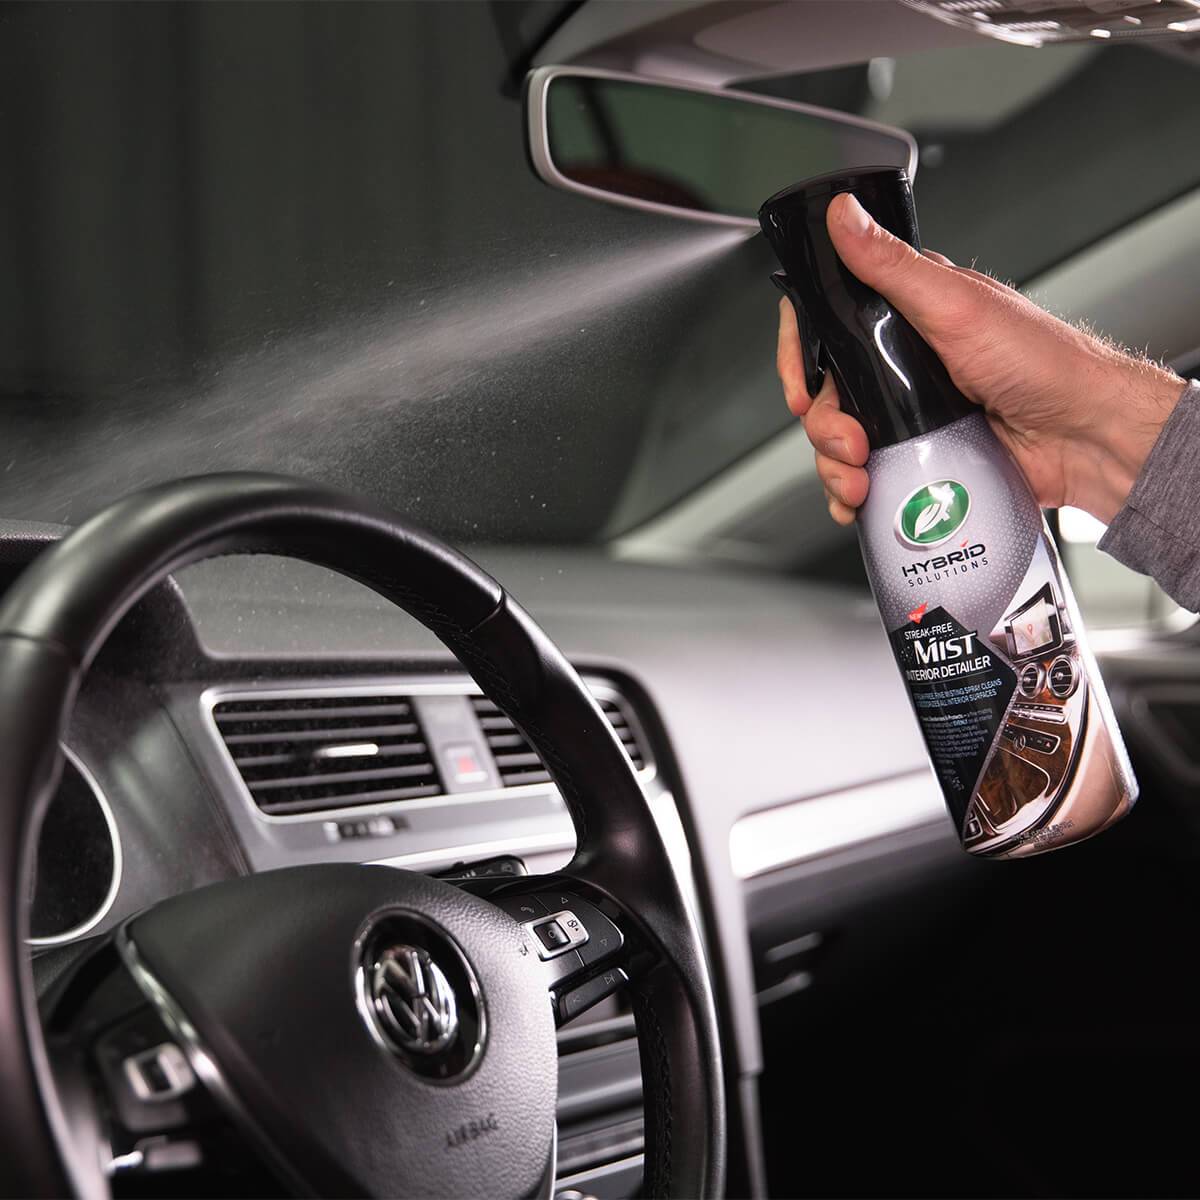 Using Stain Guard Spray to Keep Your Car's Interior Clean